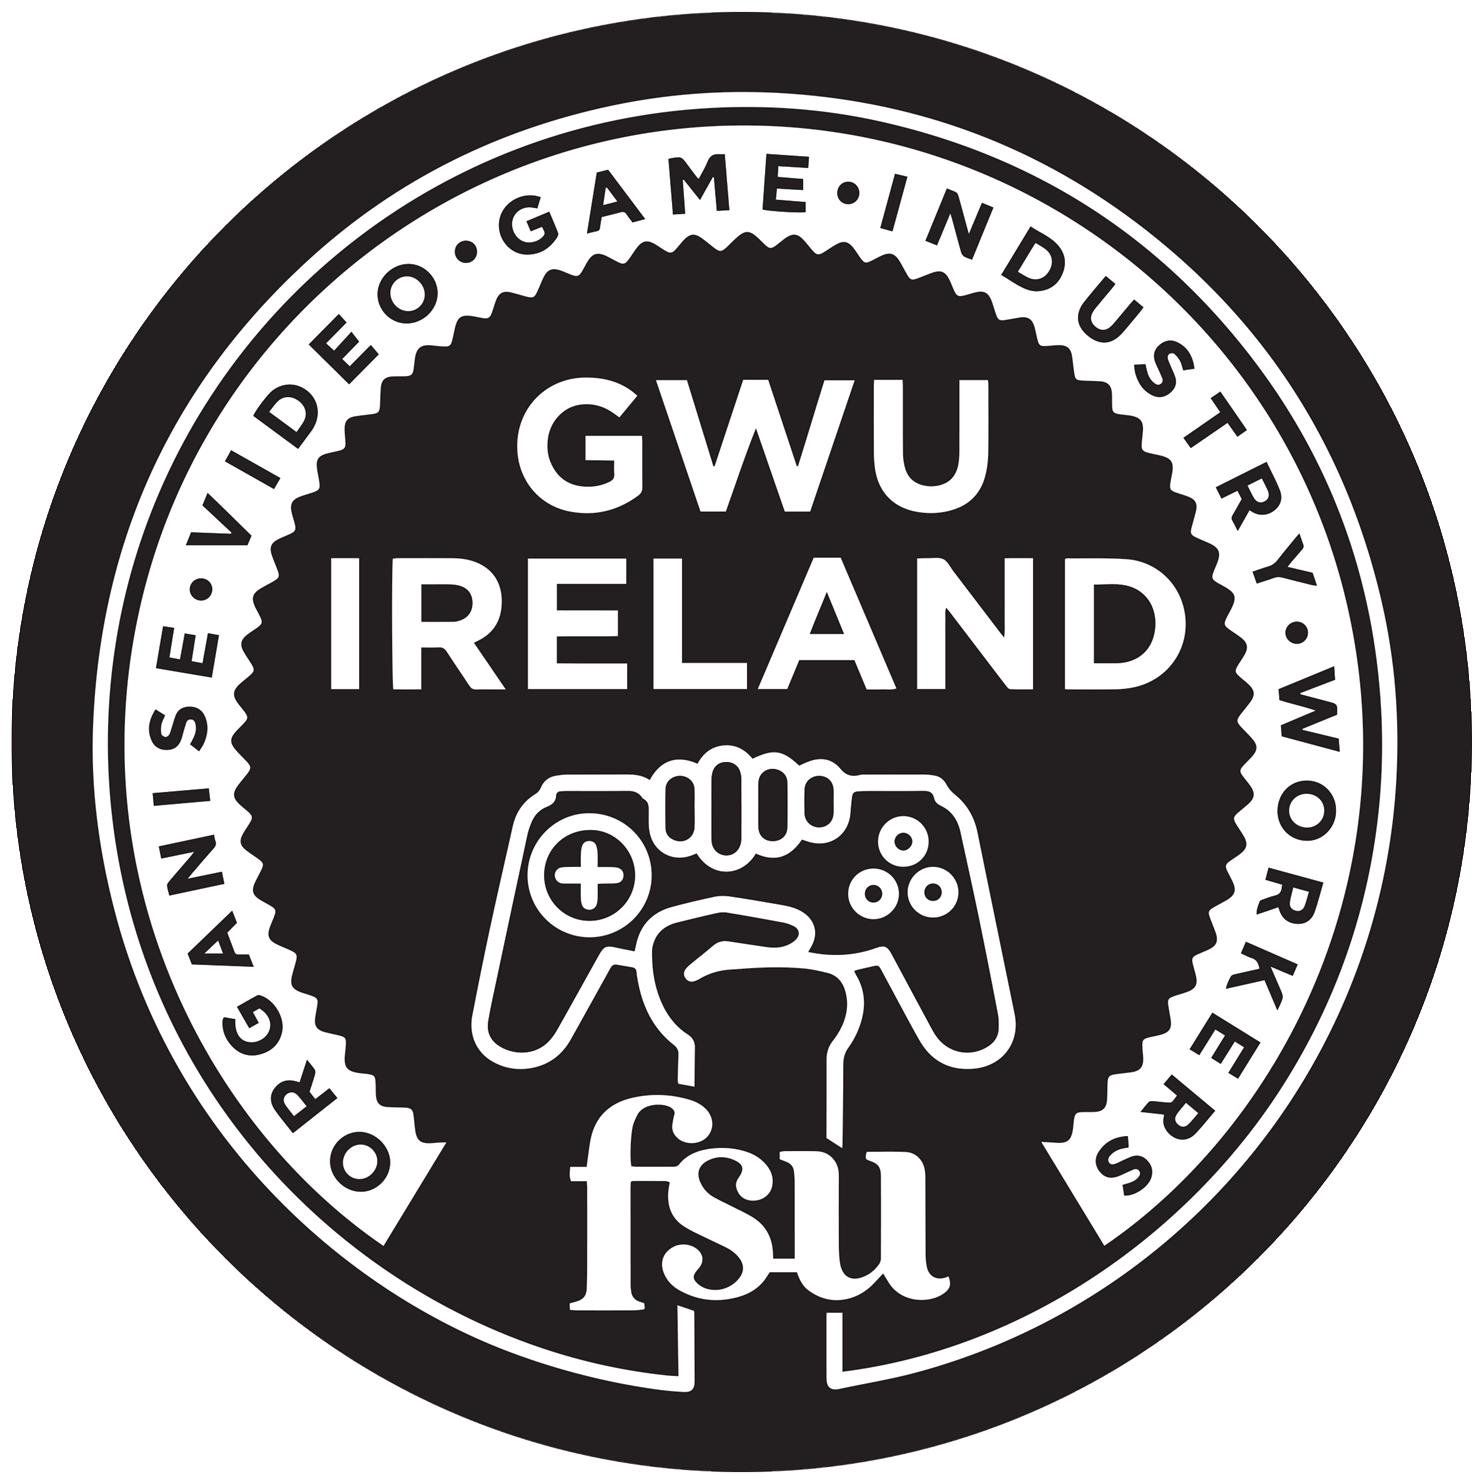 We're an organisation of workers across the Irish game industry. We're a branch of @fsuireland & part of a growing international movement of @gameworkers.